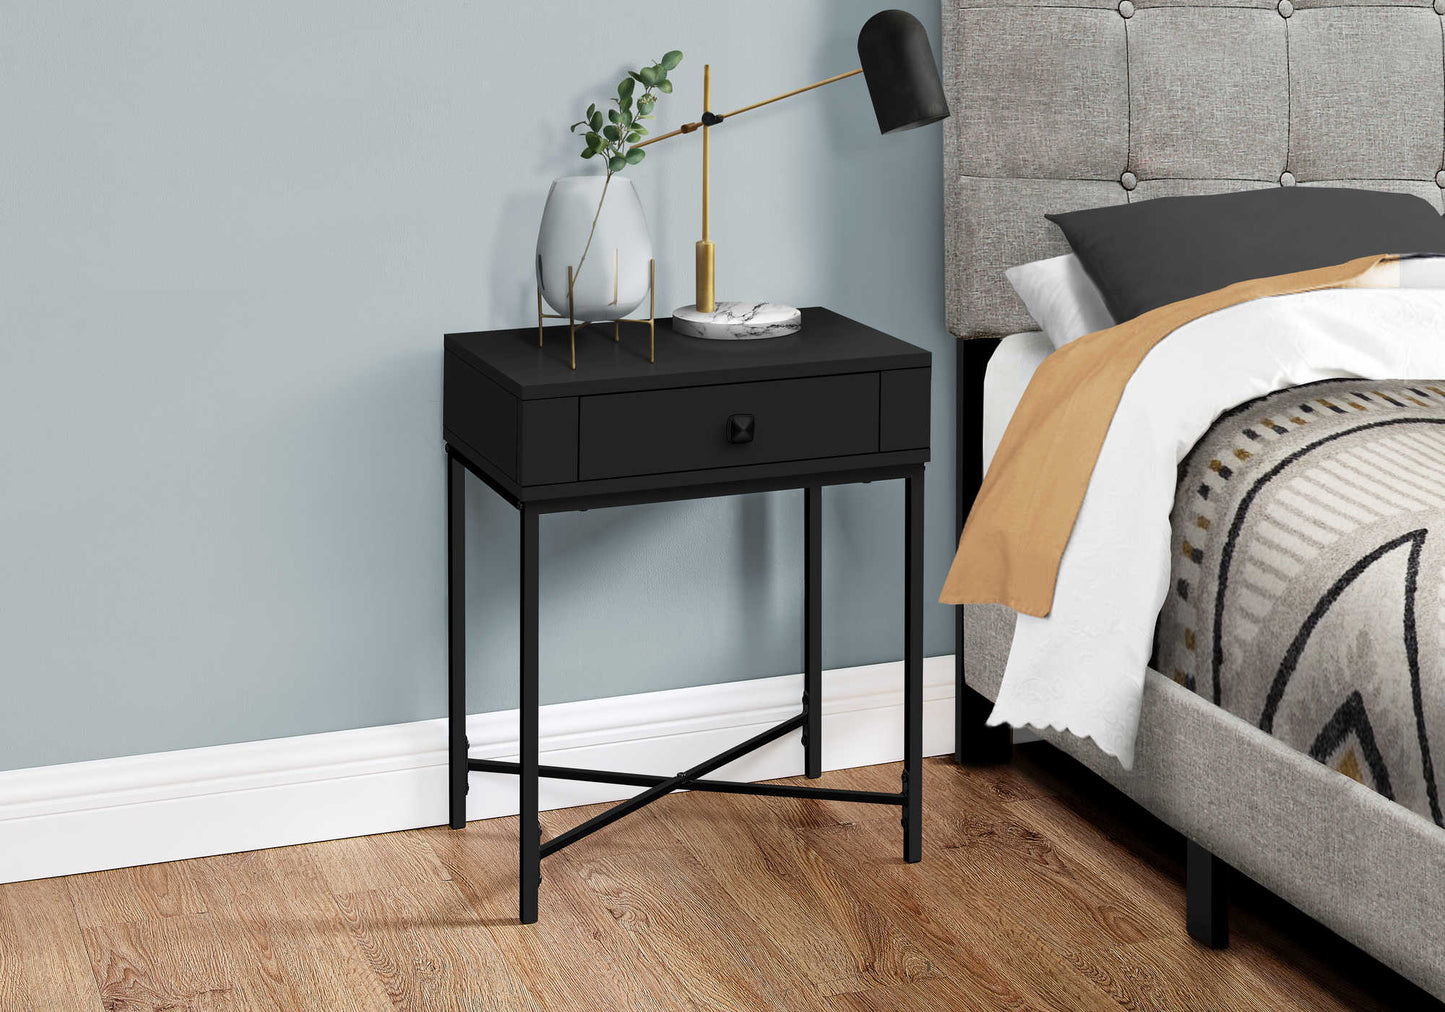 18.25"L/22.5"H Modern Metal Nightstand with Laminate Wood Tabletop